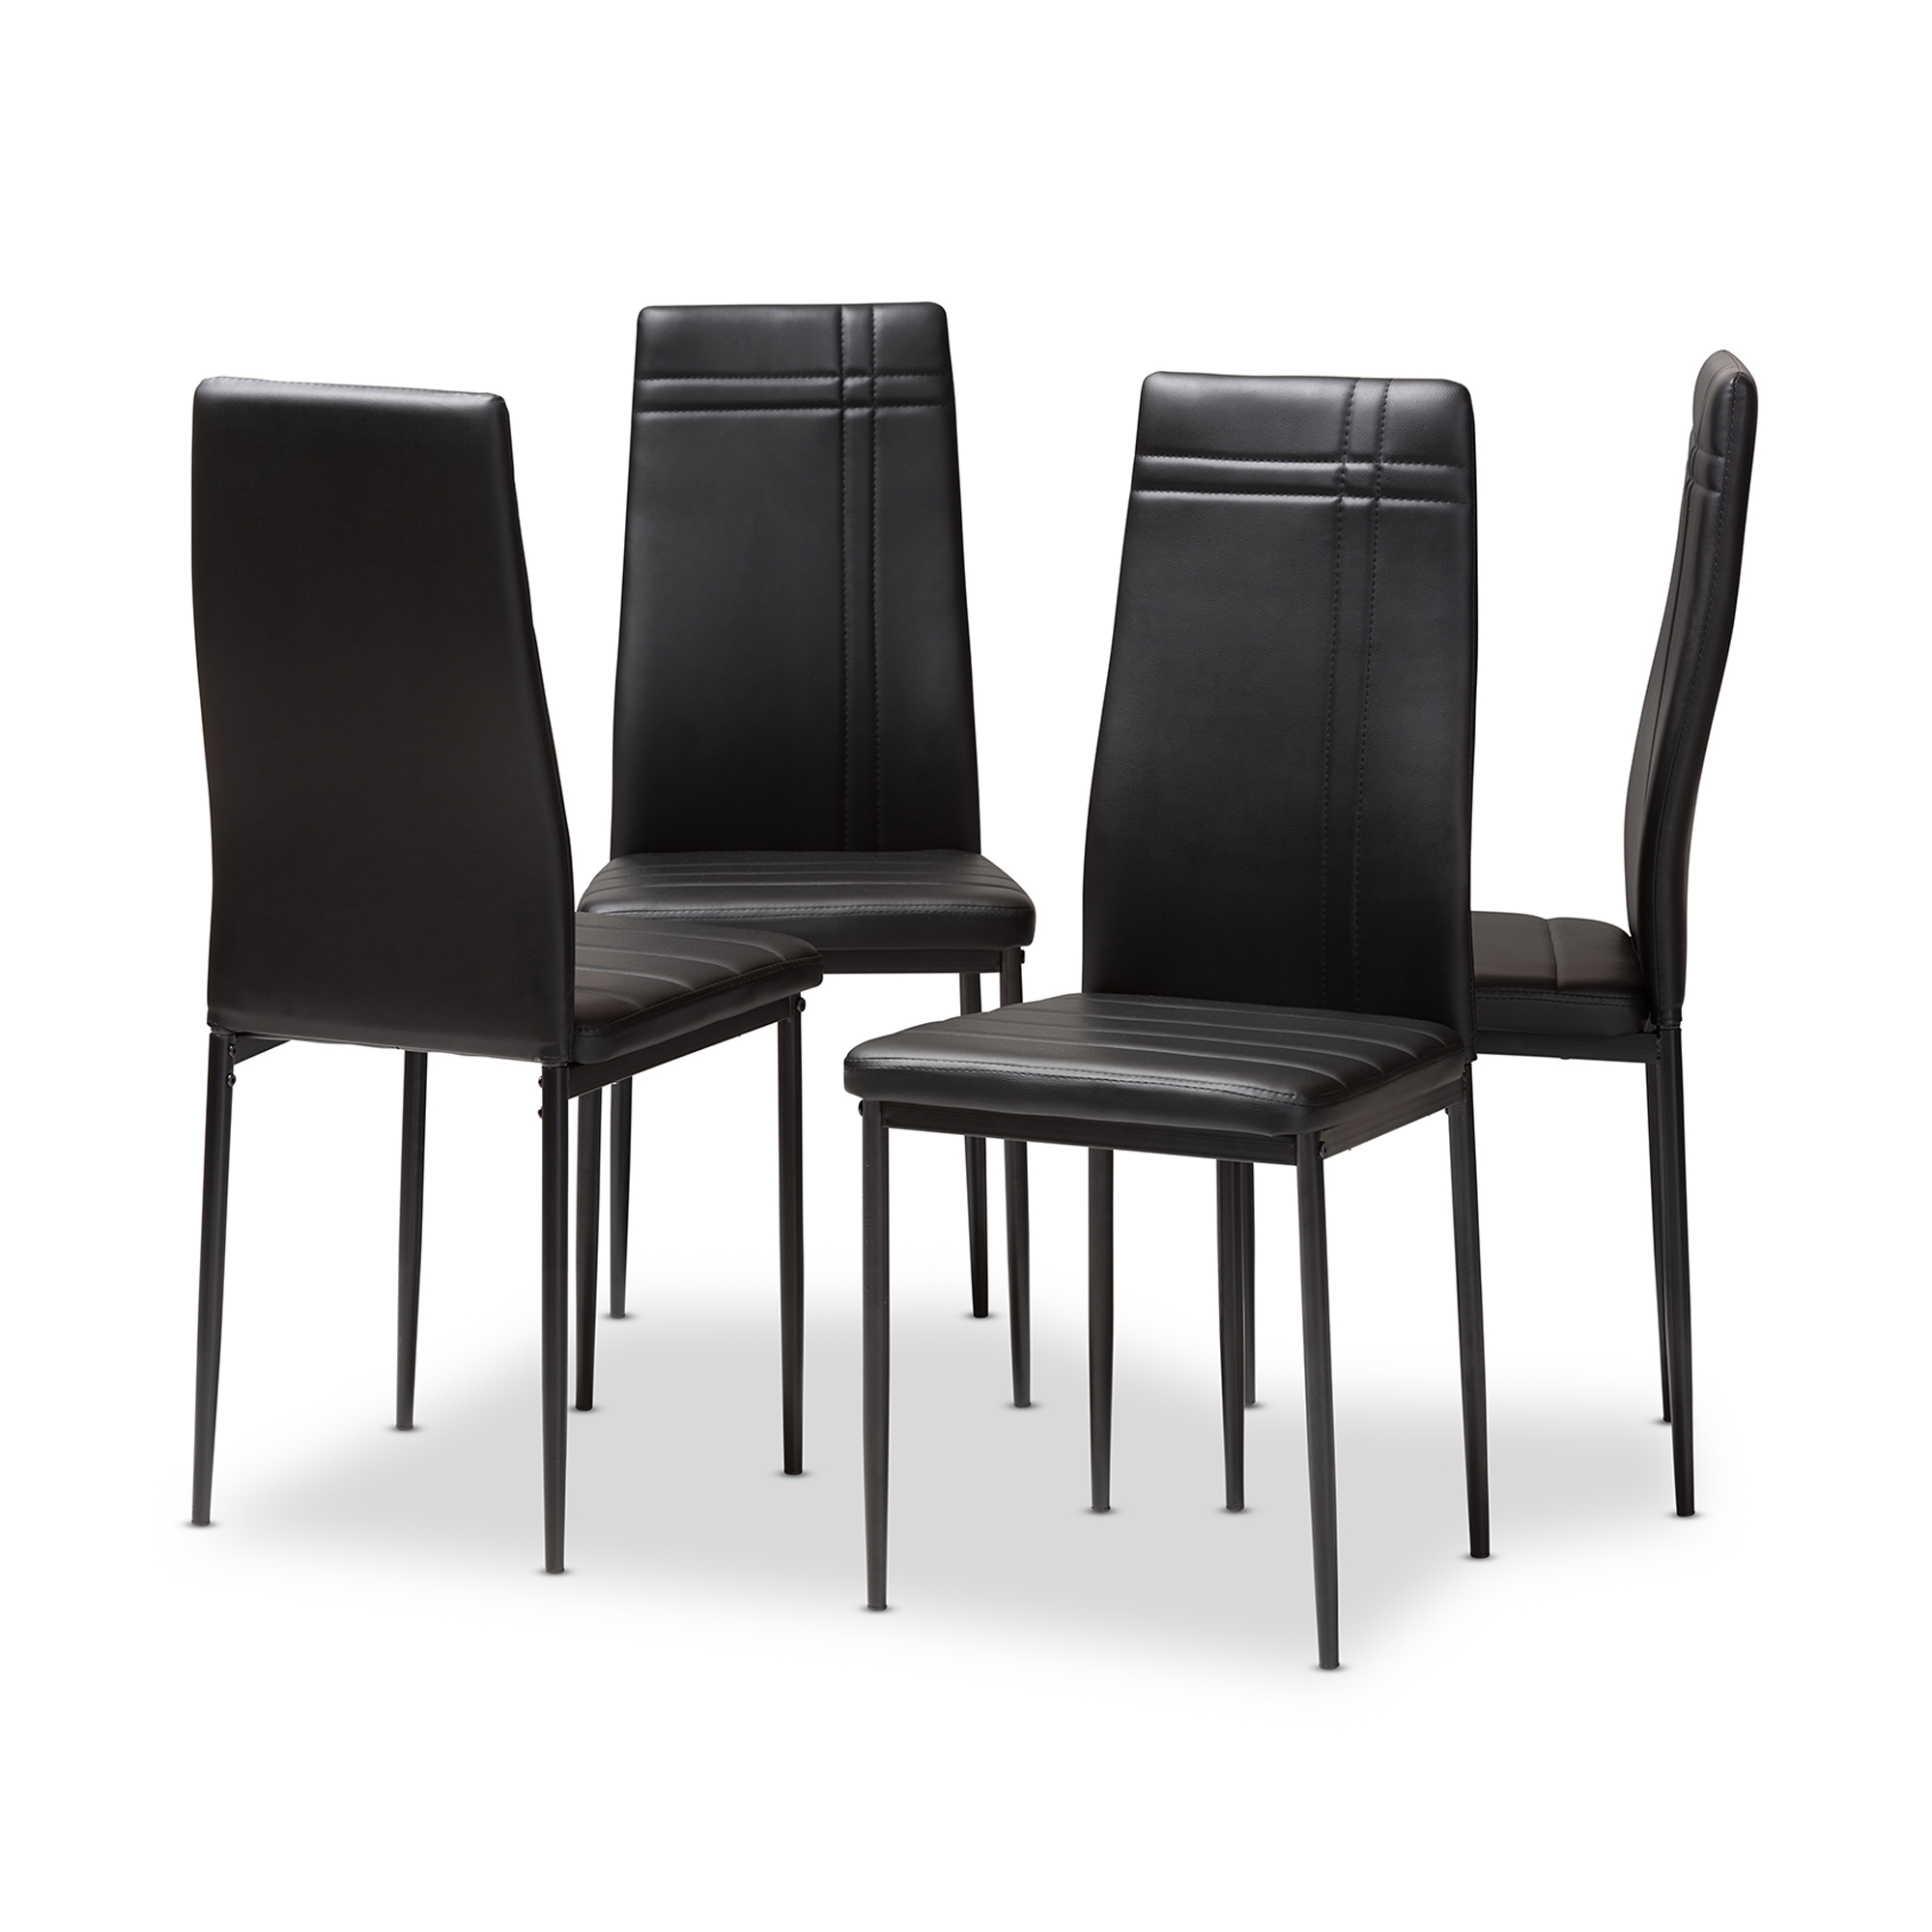 Baxton Studio Matiese Modern And, Contemporary Black Leather Chairs